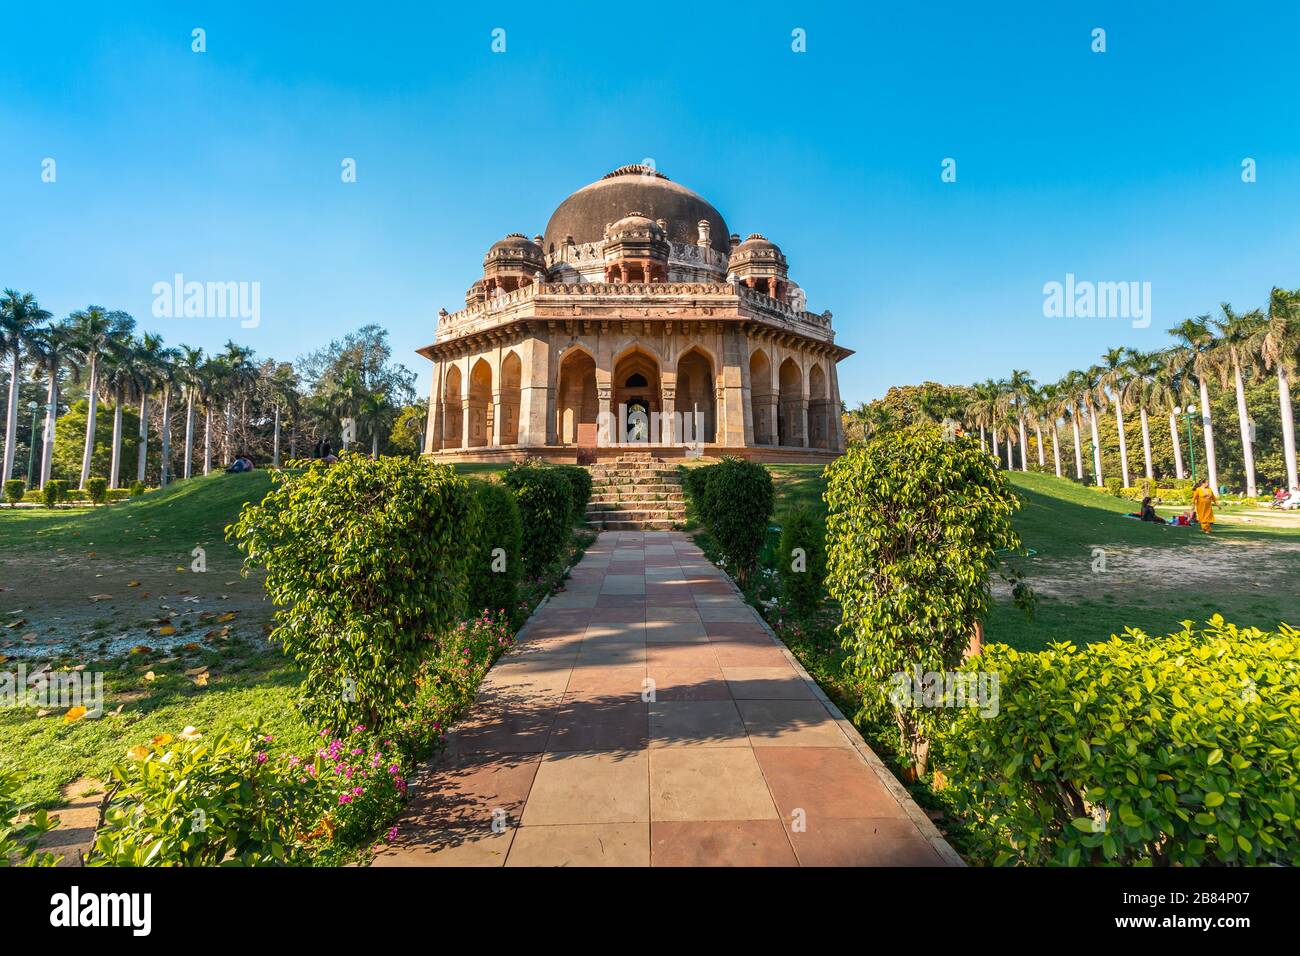 Lodhi Gardens is a city park situated in New Delhi, India Stock Photo